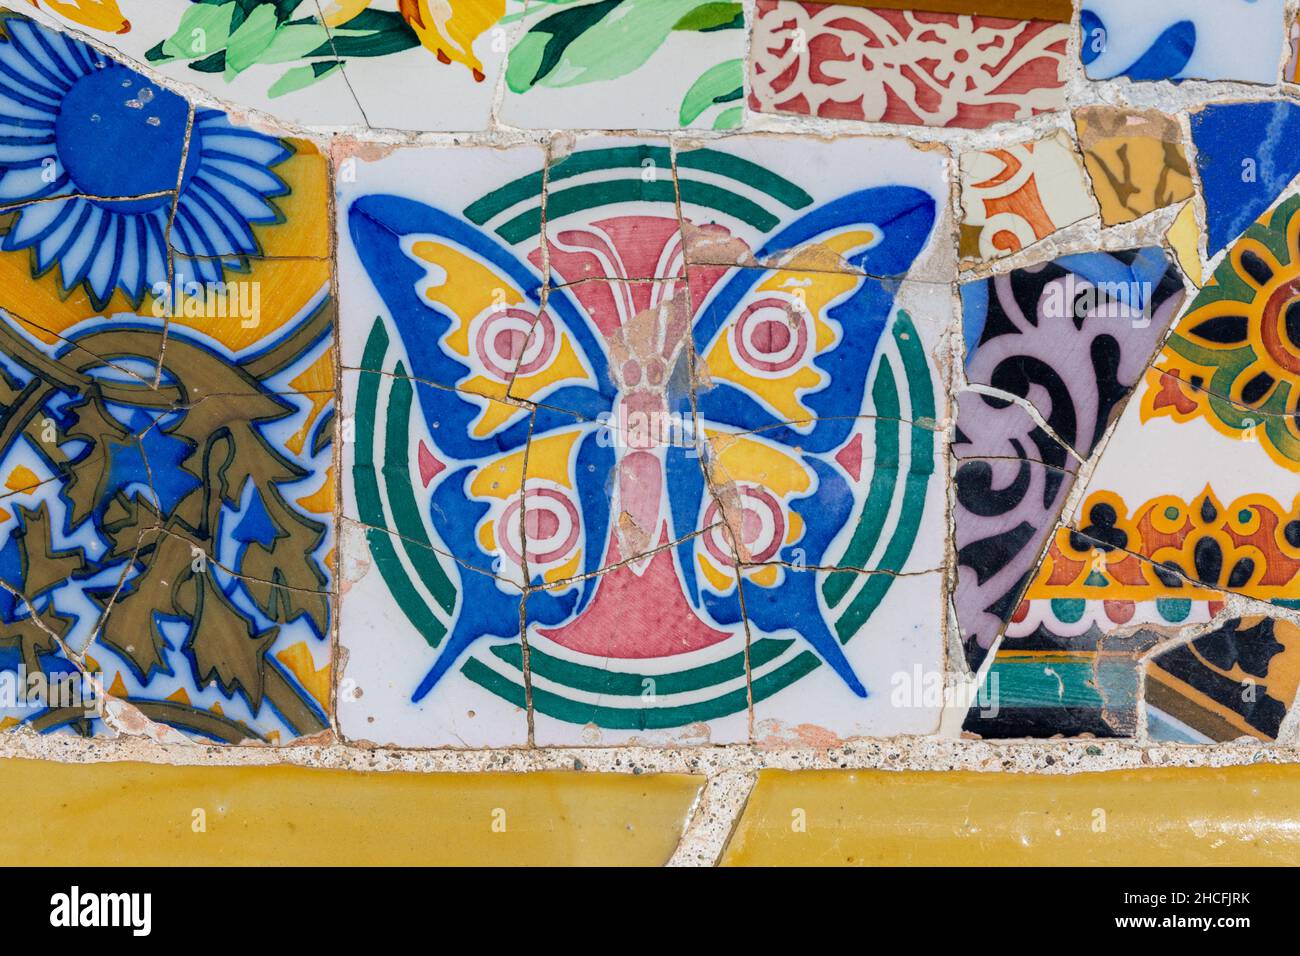 Gaudi colorful and emblematic mosaic work on the main terrace of the Park Guell, Barcelona Stock Photo